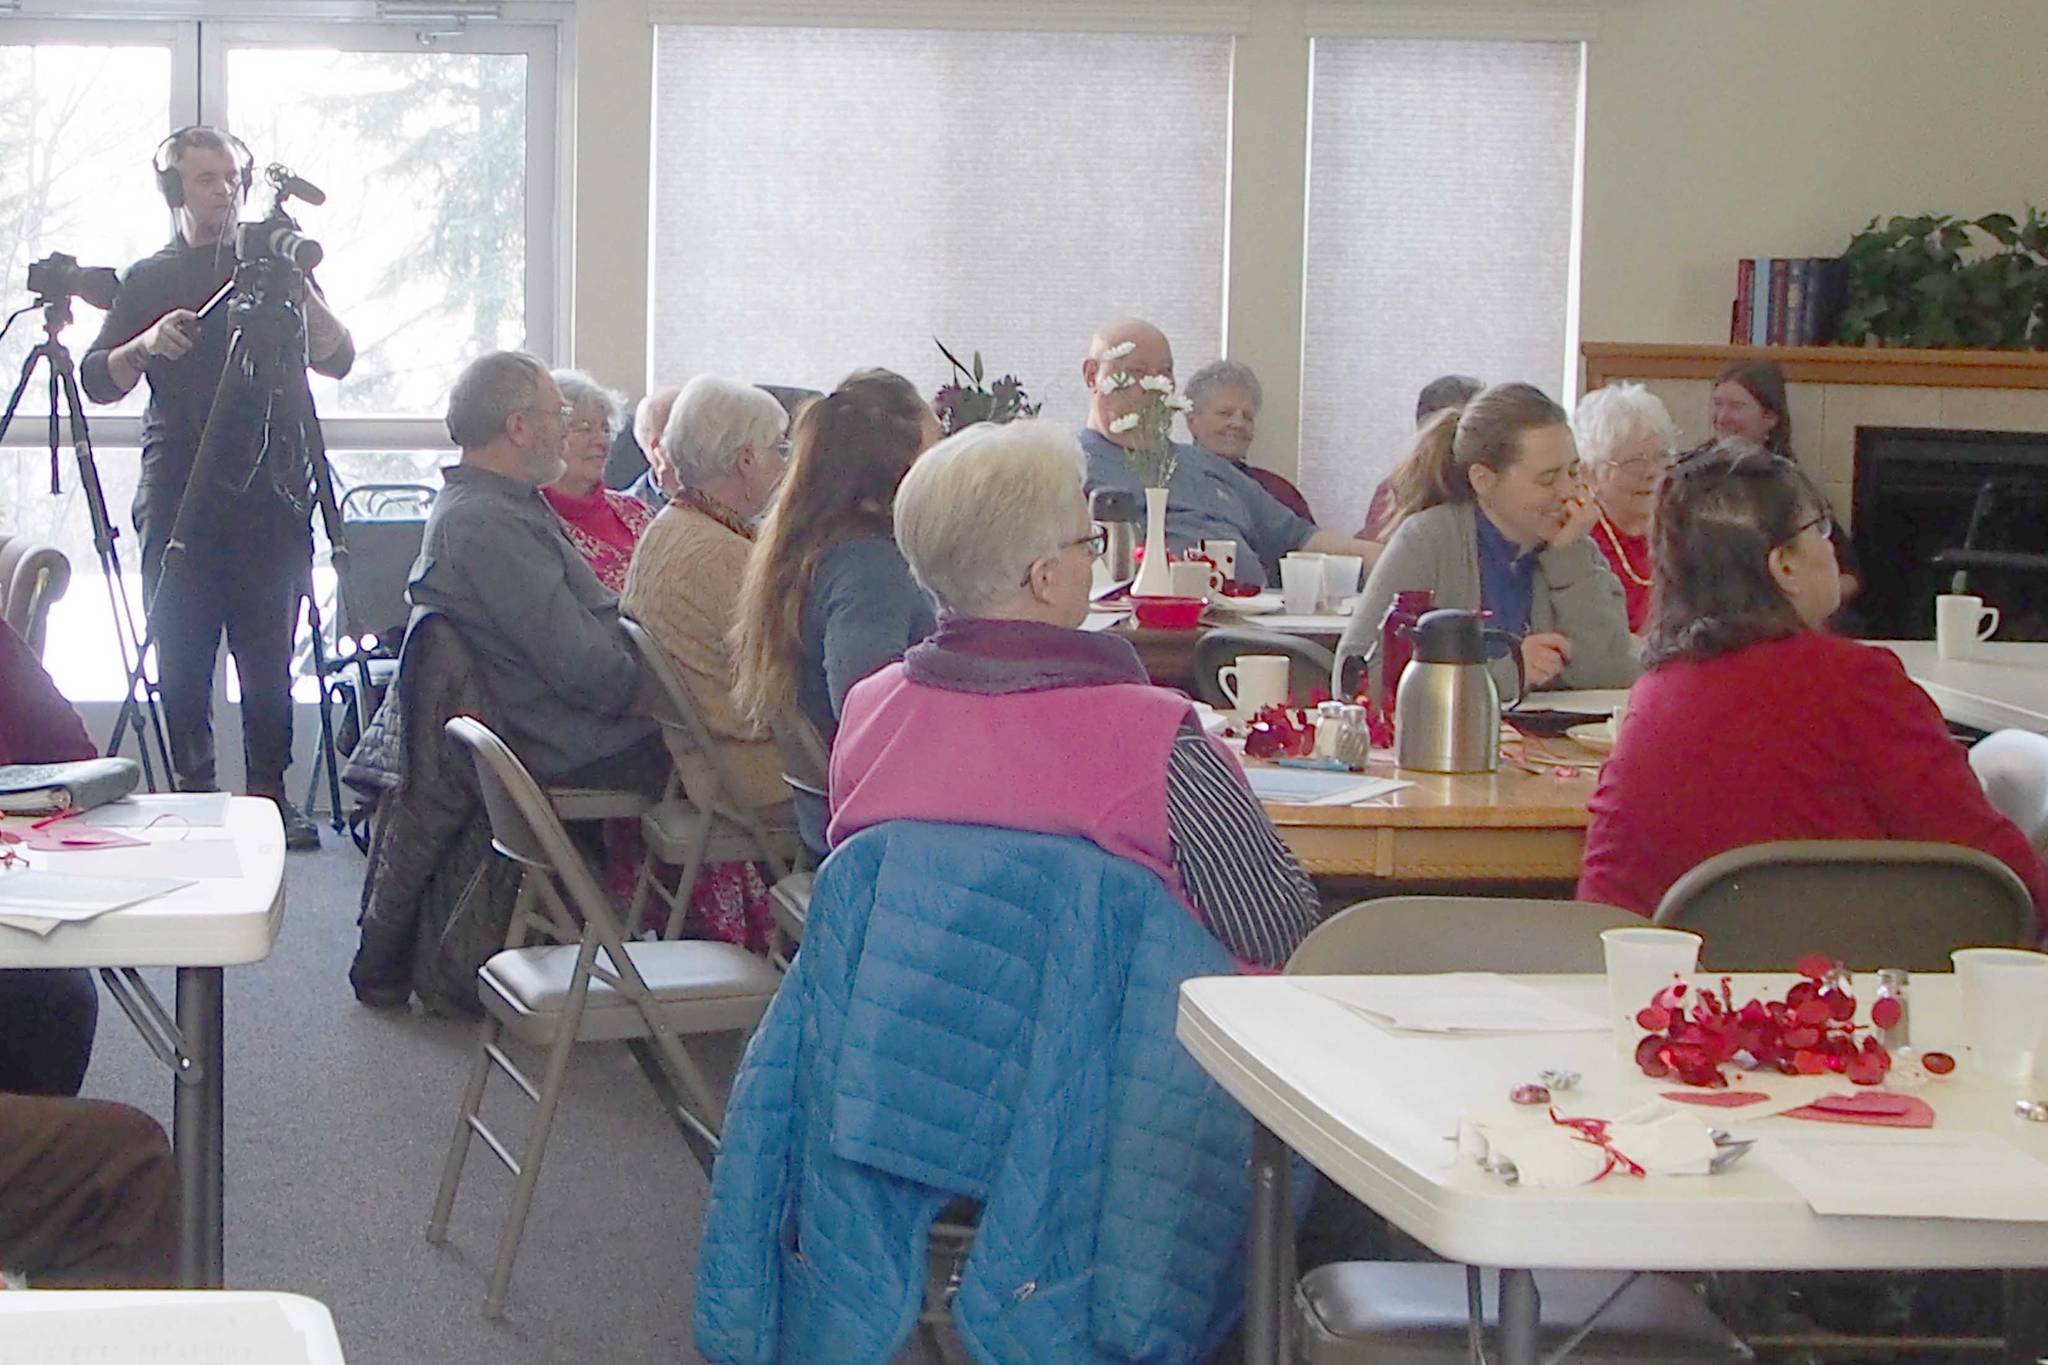 A “listening session” was held and recorded in Cooper Landing this week as part of an organized effort to record community residents’ observations of change on the Kenai Peninsula. (Photo provided by Kenai National Wildlife Refuge)